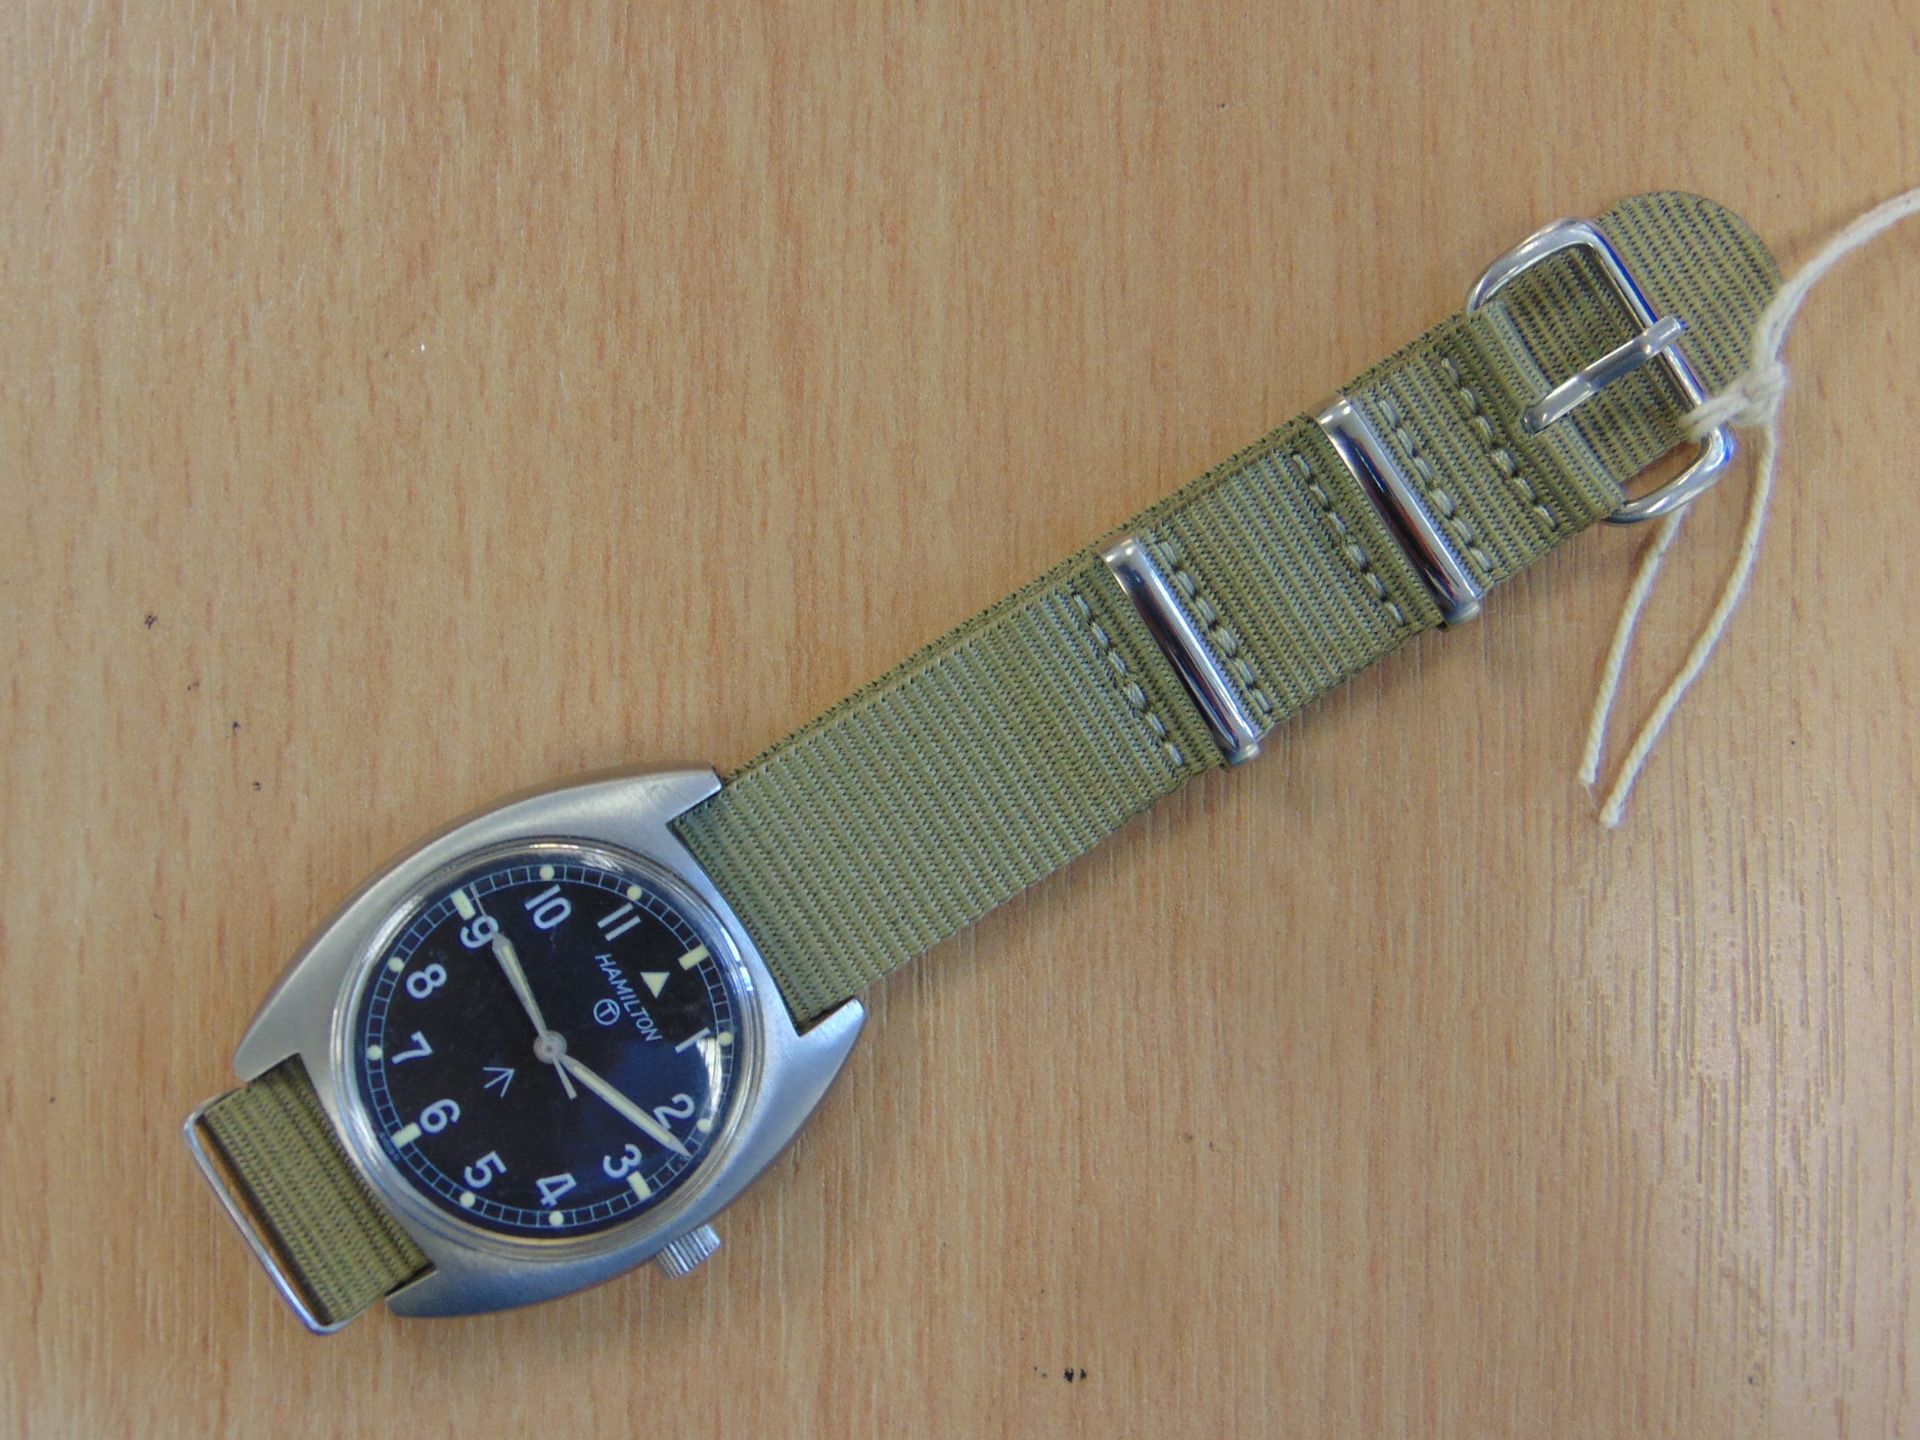 V.V. RARE UNISSUED HAMITON WIND UP W10 SERVICE WATCH NATO MARKINGS DATED 1973